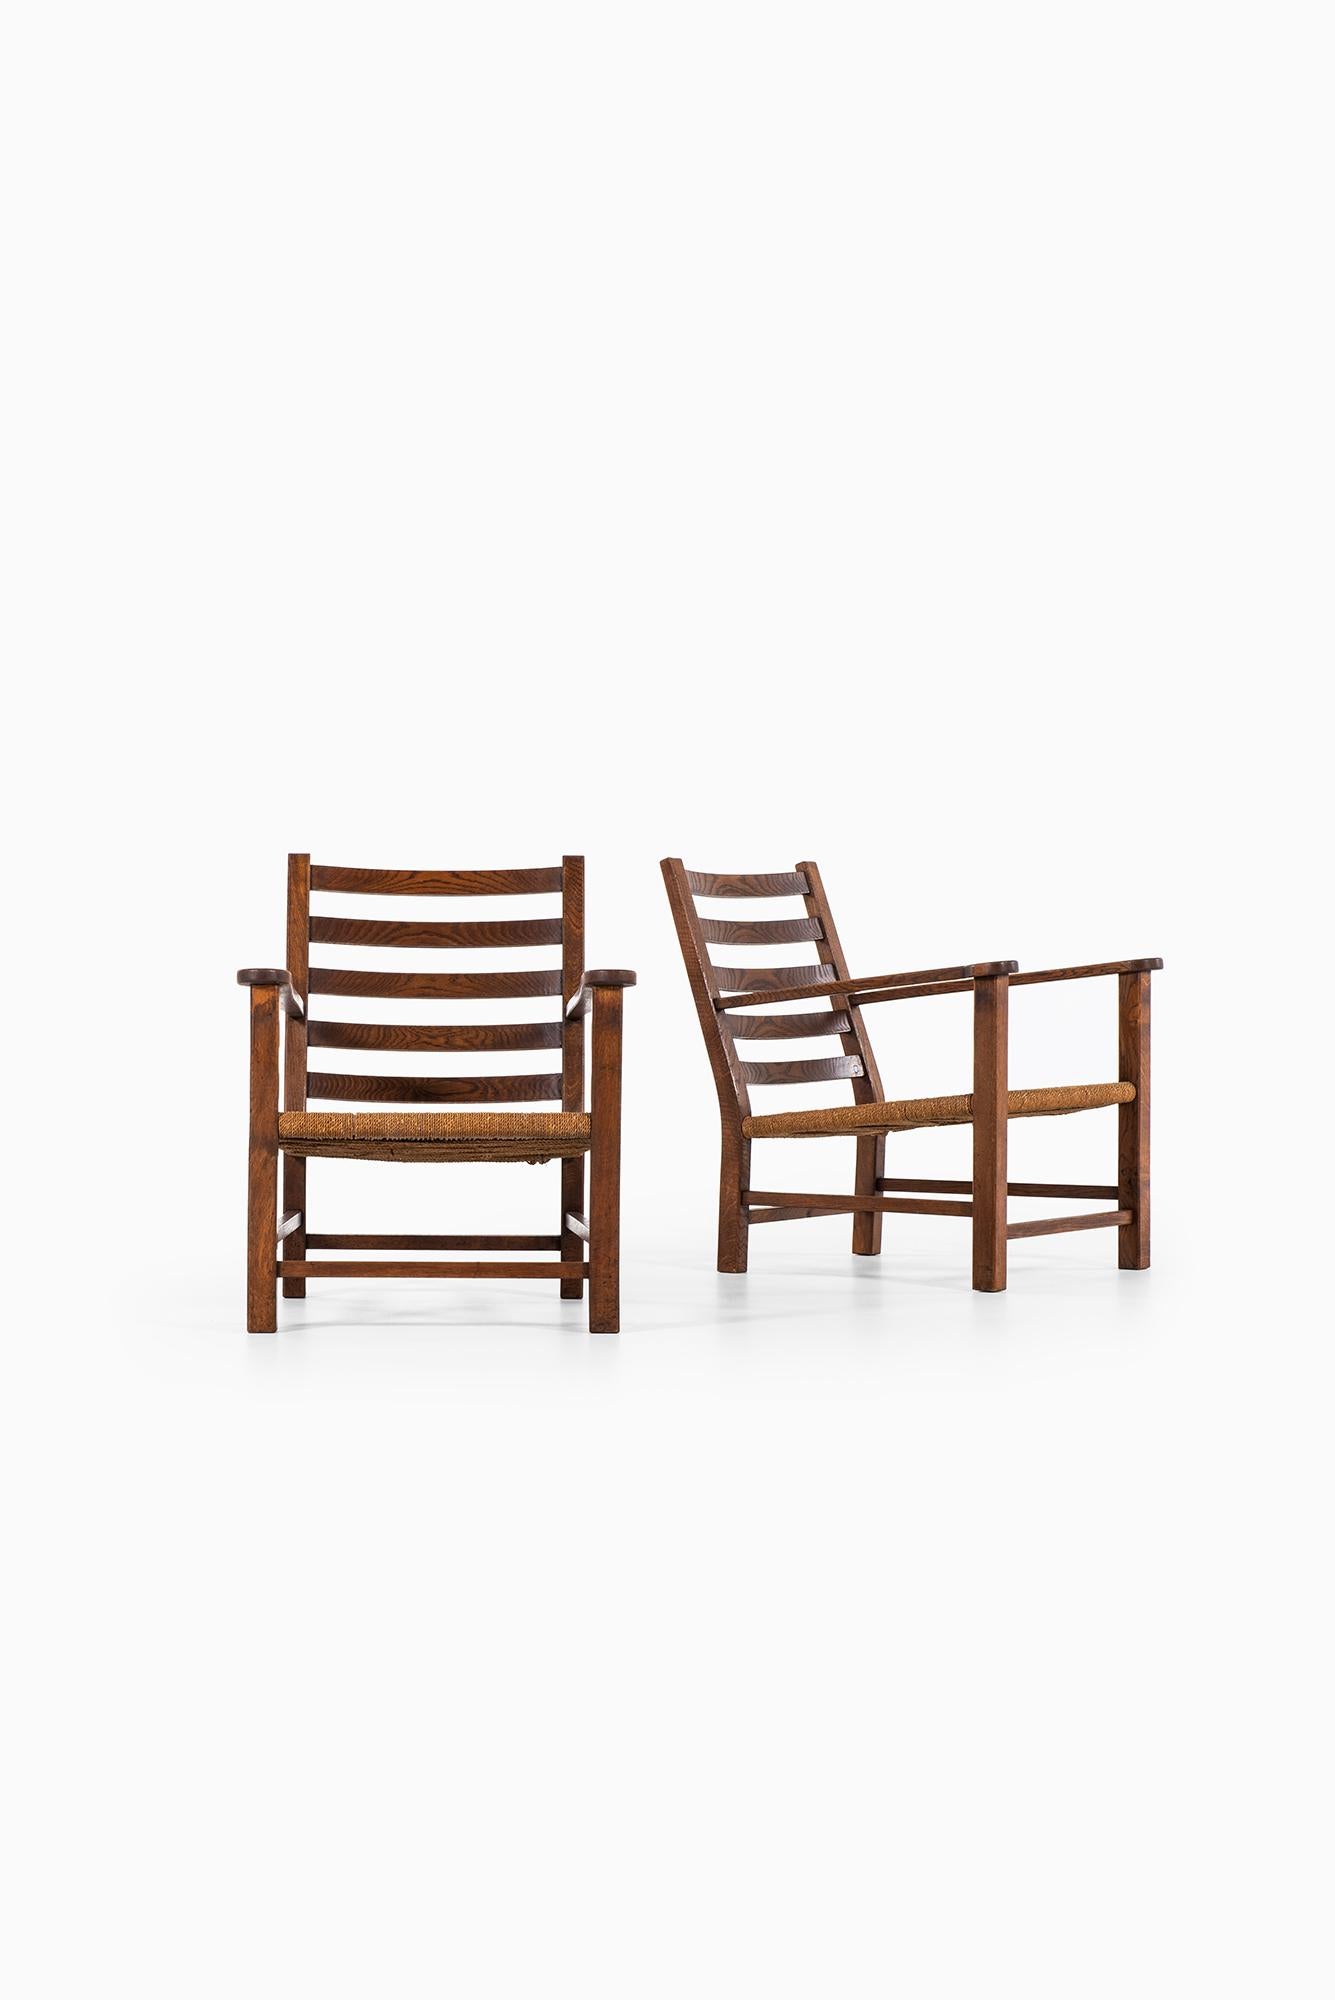 A pair of easy chairs in oak and hemp string. Probably produced in Sweden.